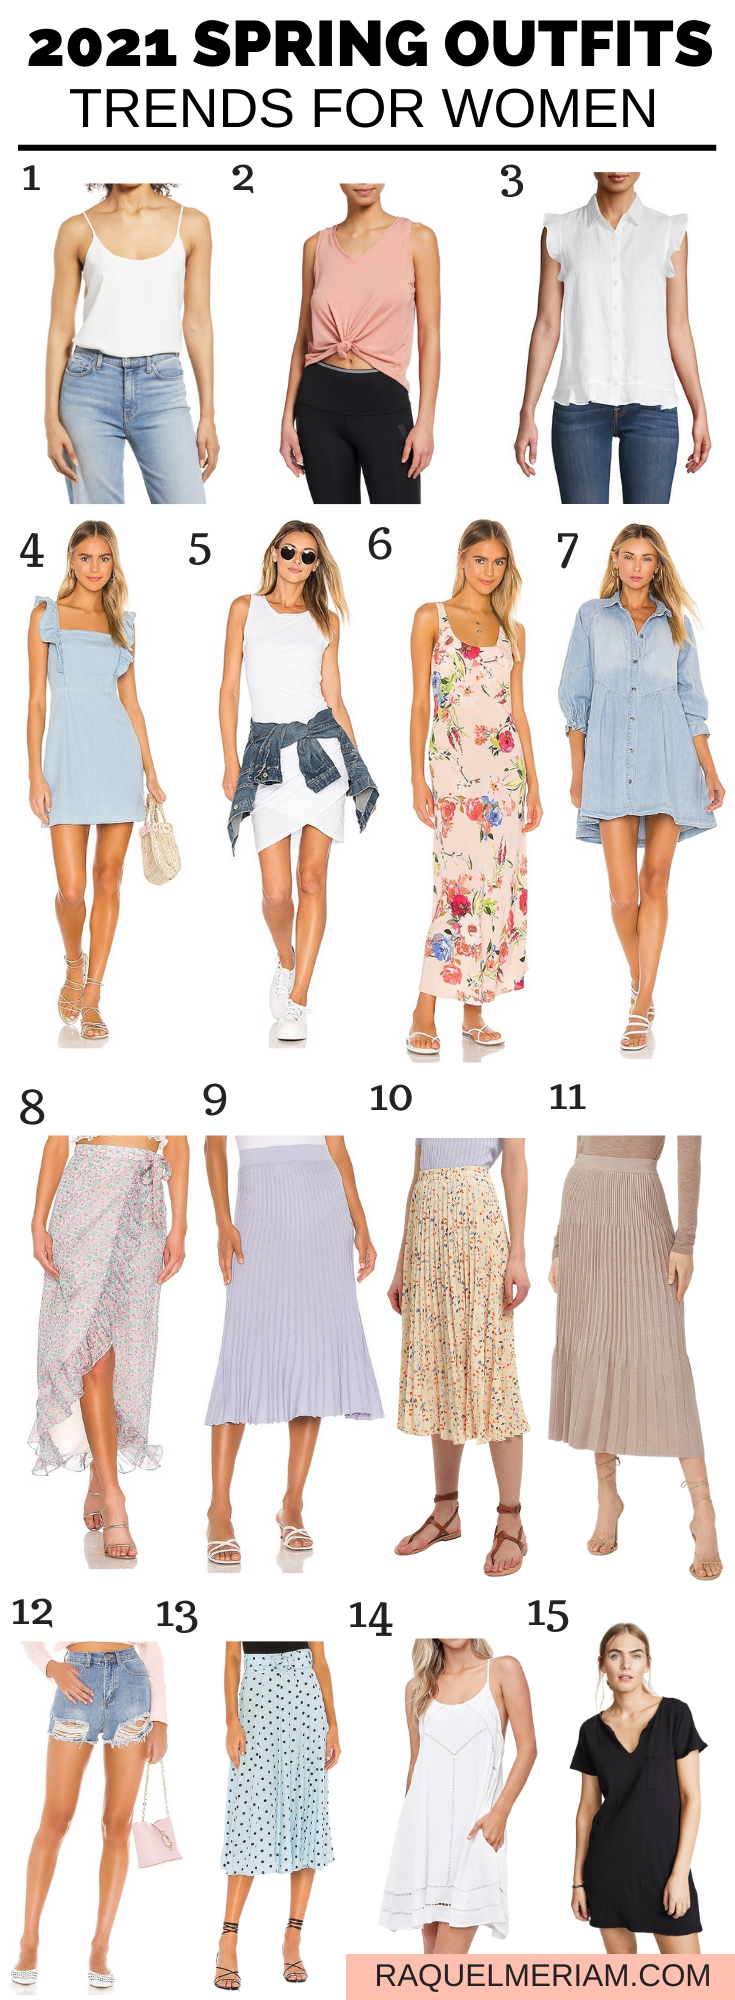 As the weather warms up, I'm always excited to find 2021 Spring Outfit Trends for Women. From florals to midi skirts, it's going to be a great year for fashion.